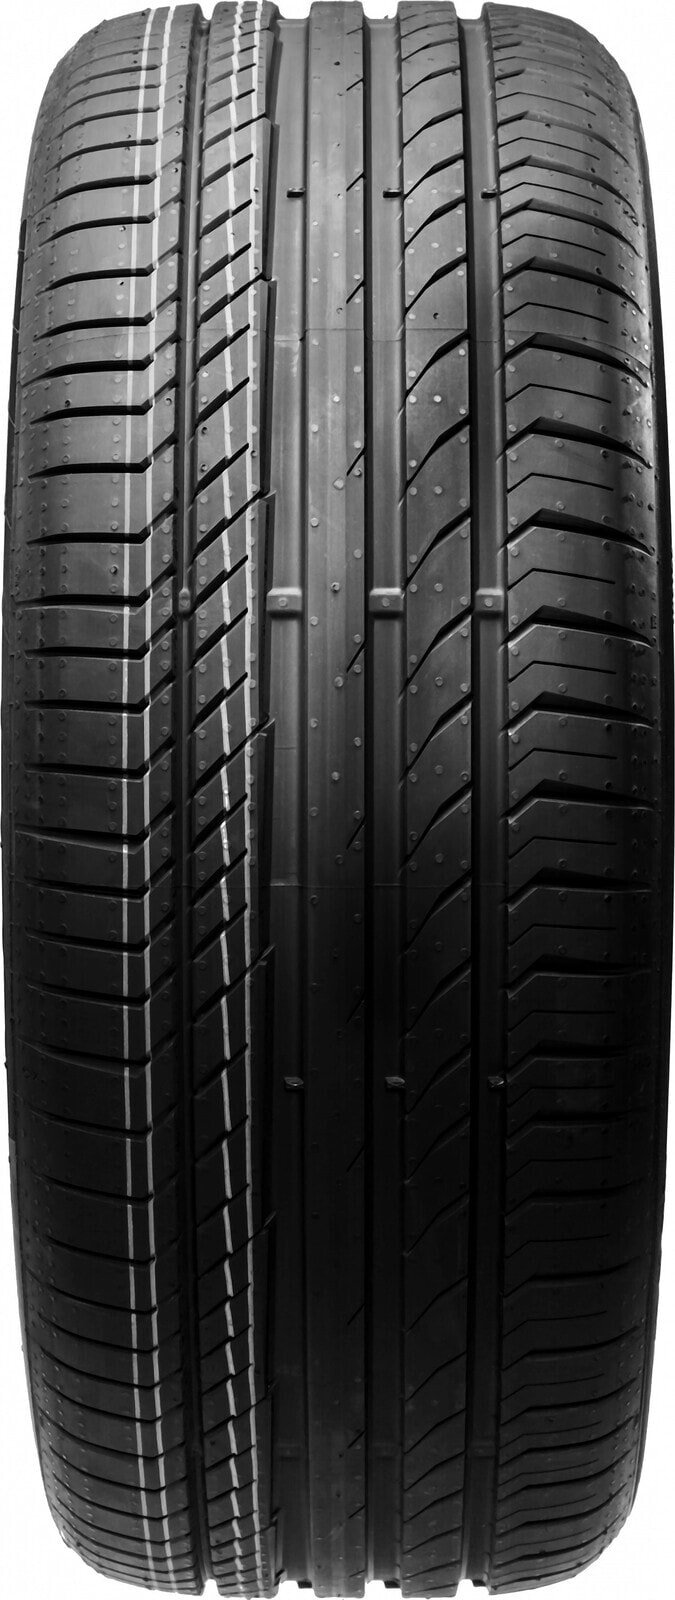 Шины летние Continental Sportcontact 5 CONTISEAL SIL * XL DOT18 255/45 R22 107Y